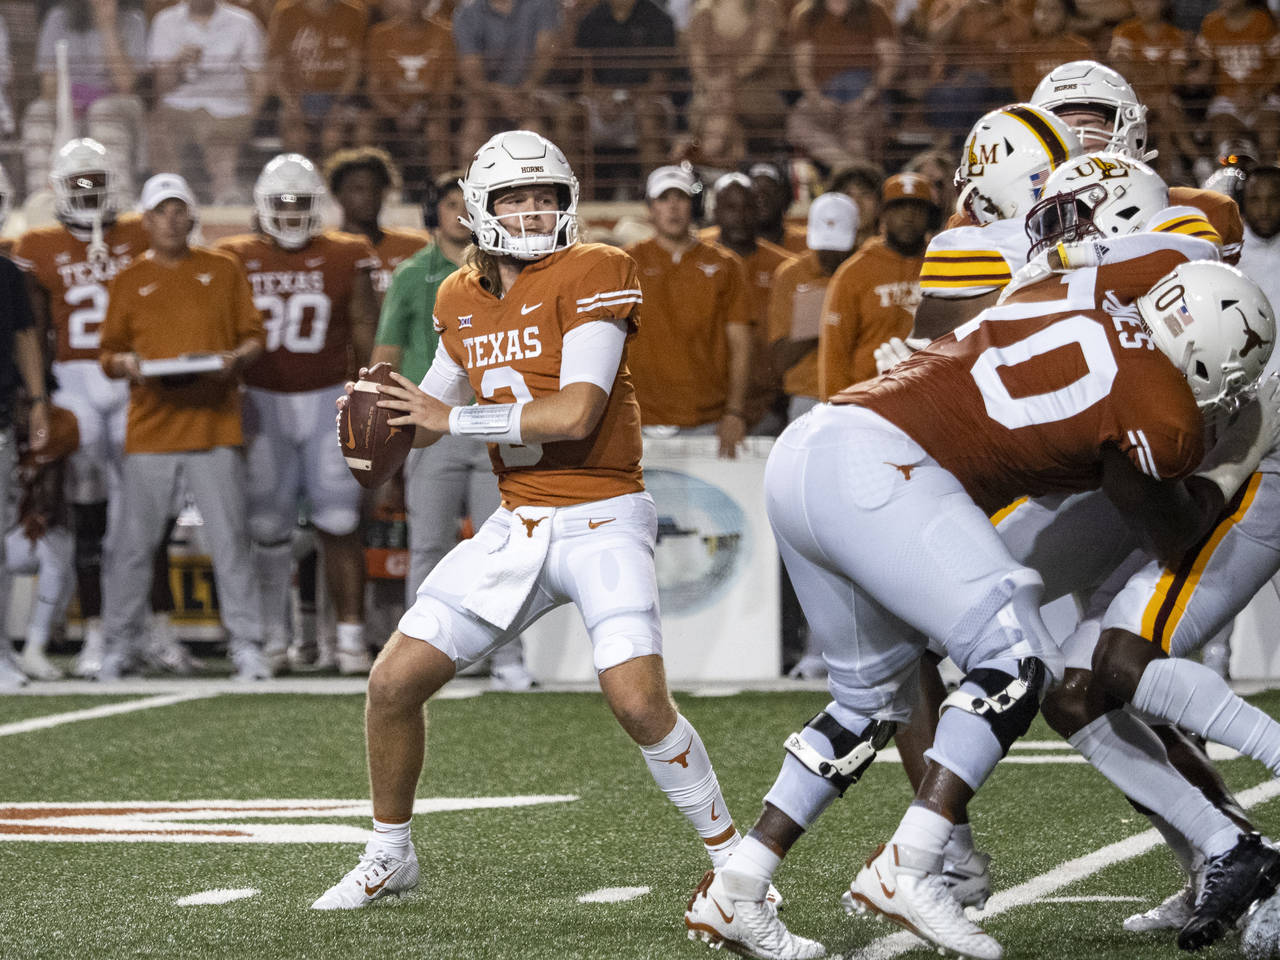 Texas quarterback Quinn Ewers, front left, looks to pass during the first half of an NCAA college f...